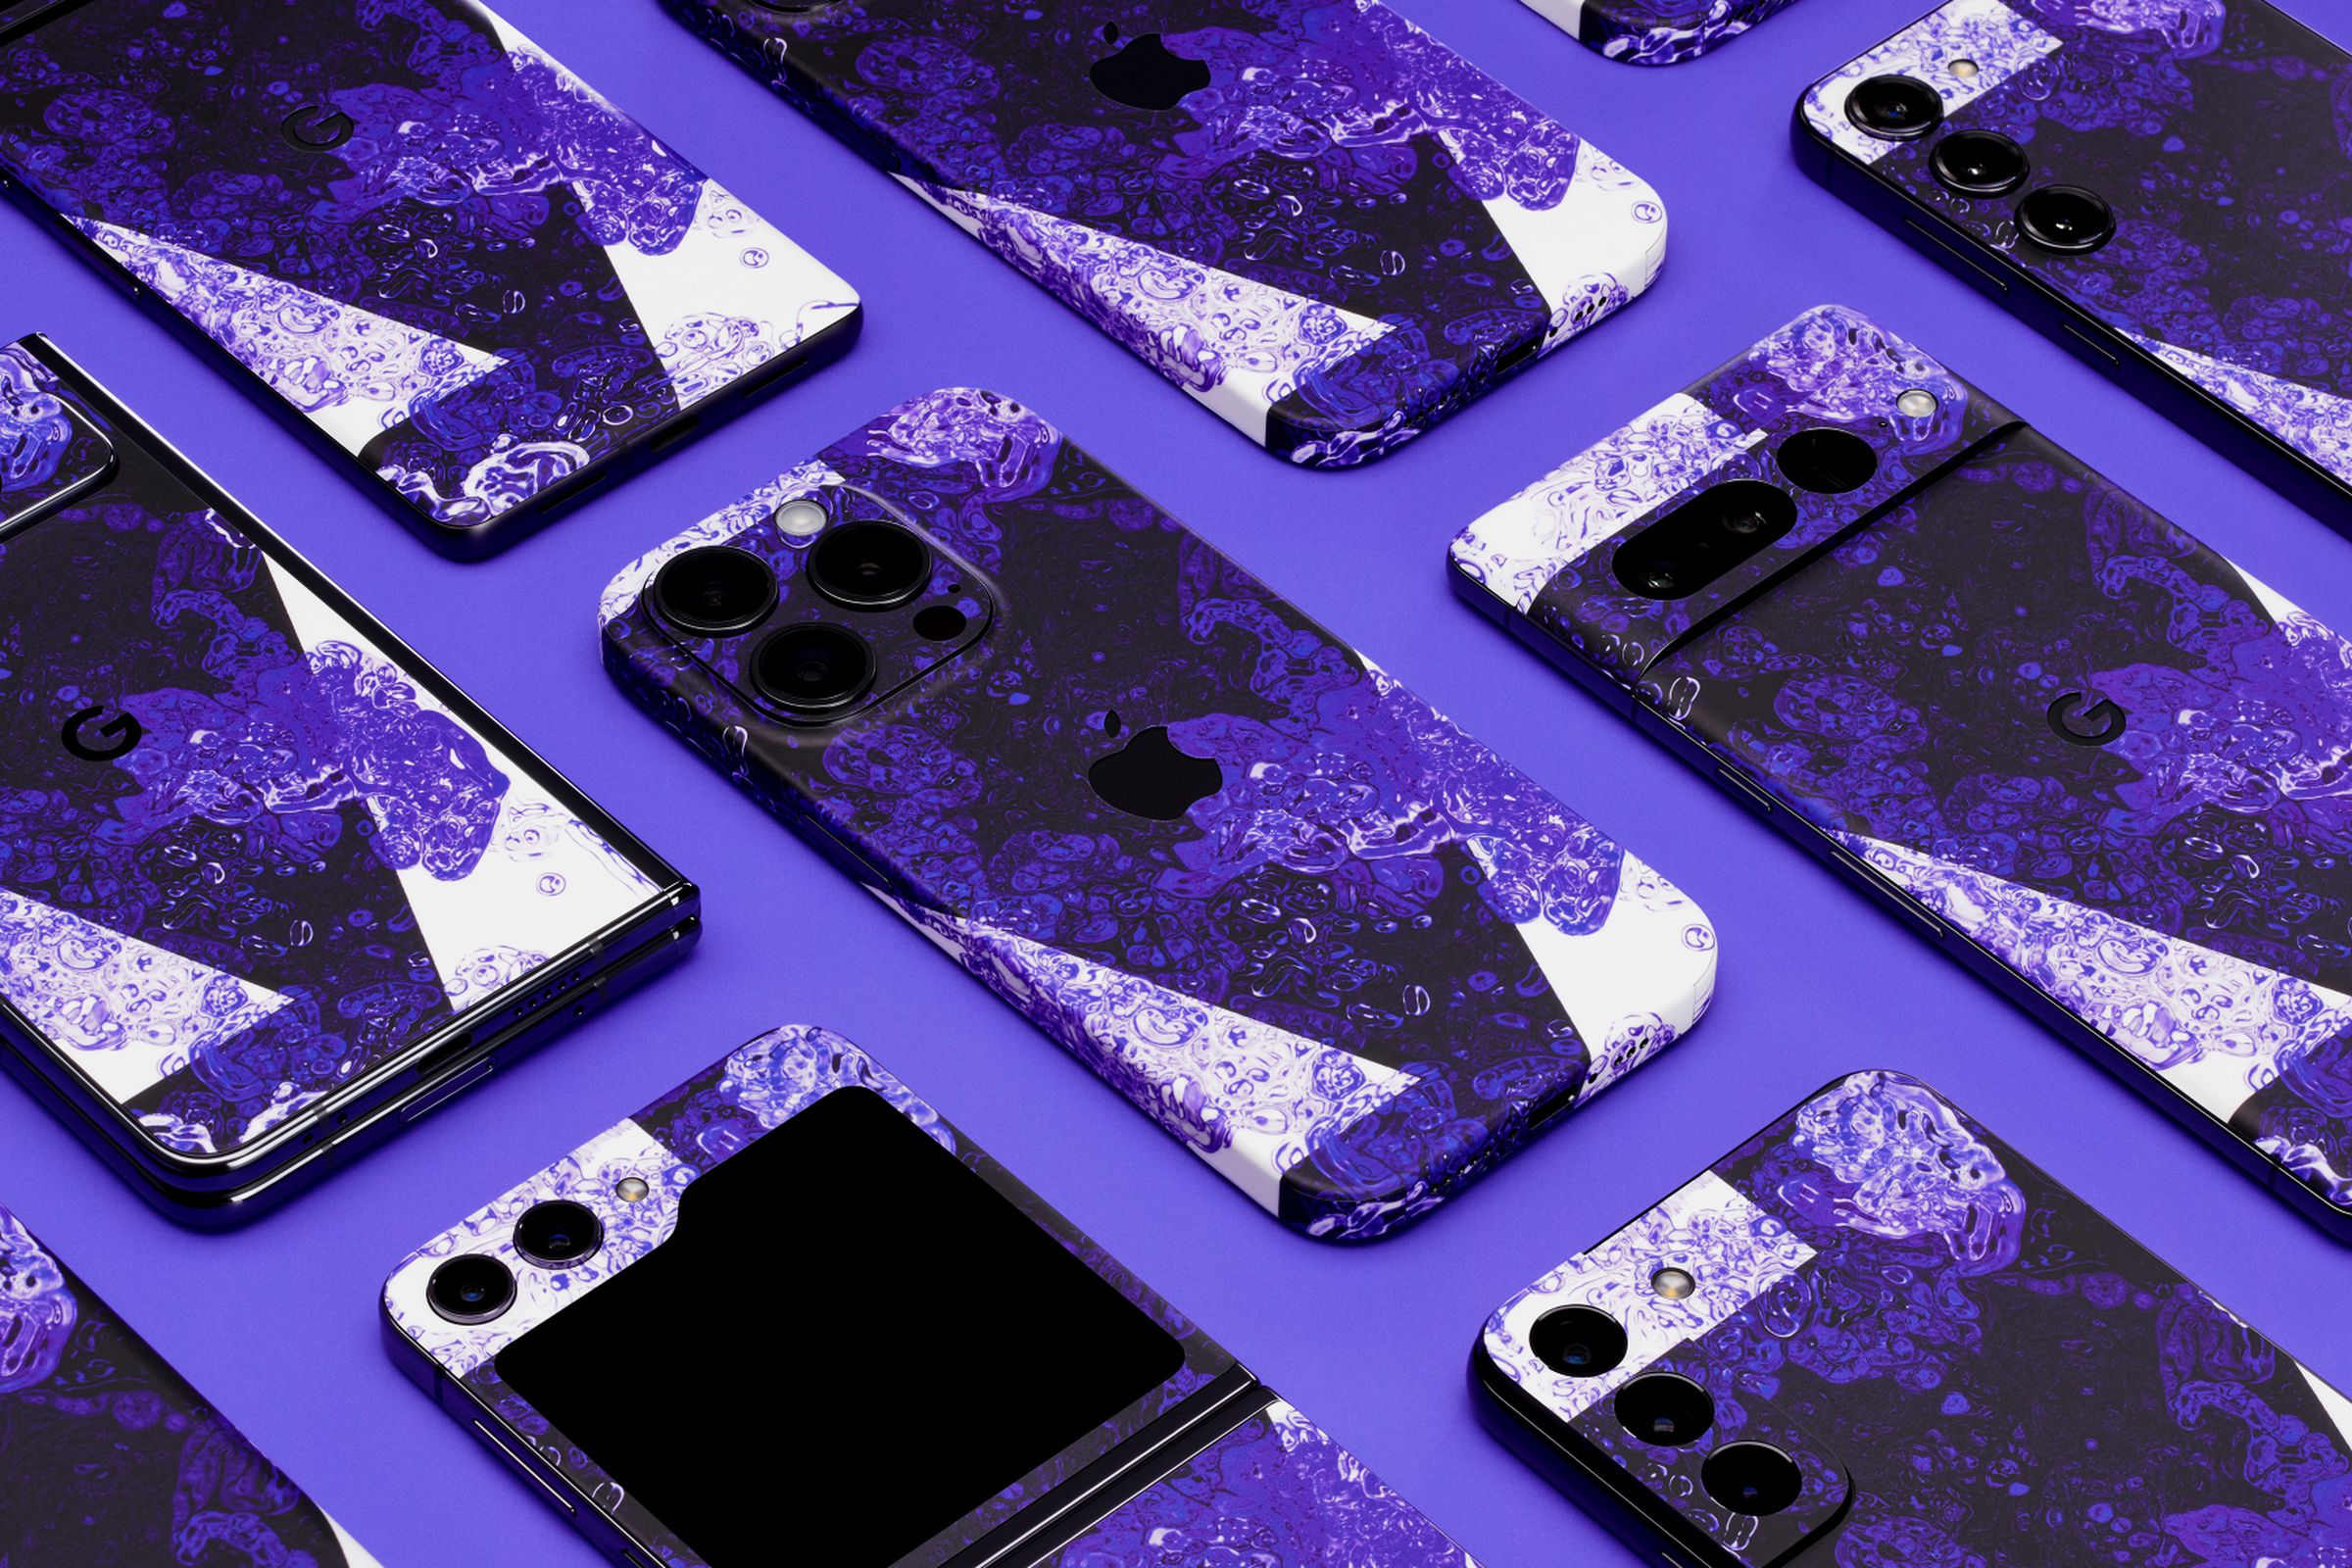 The Verge and dbrand’s Monogram skin applied to a variety of phones